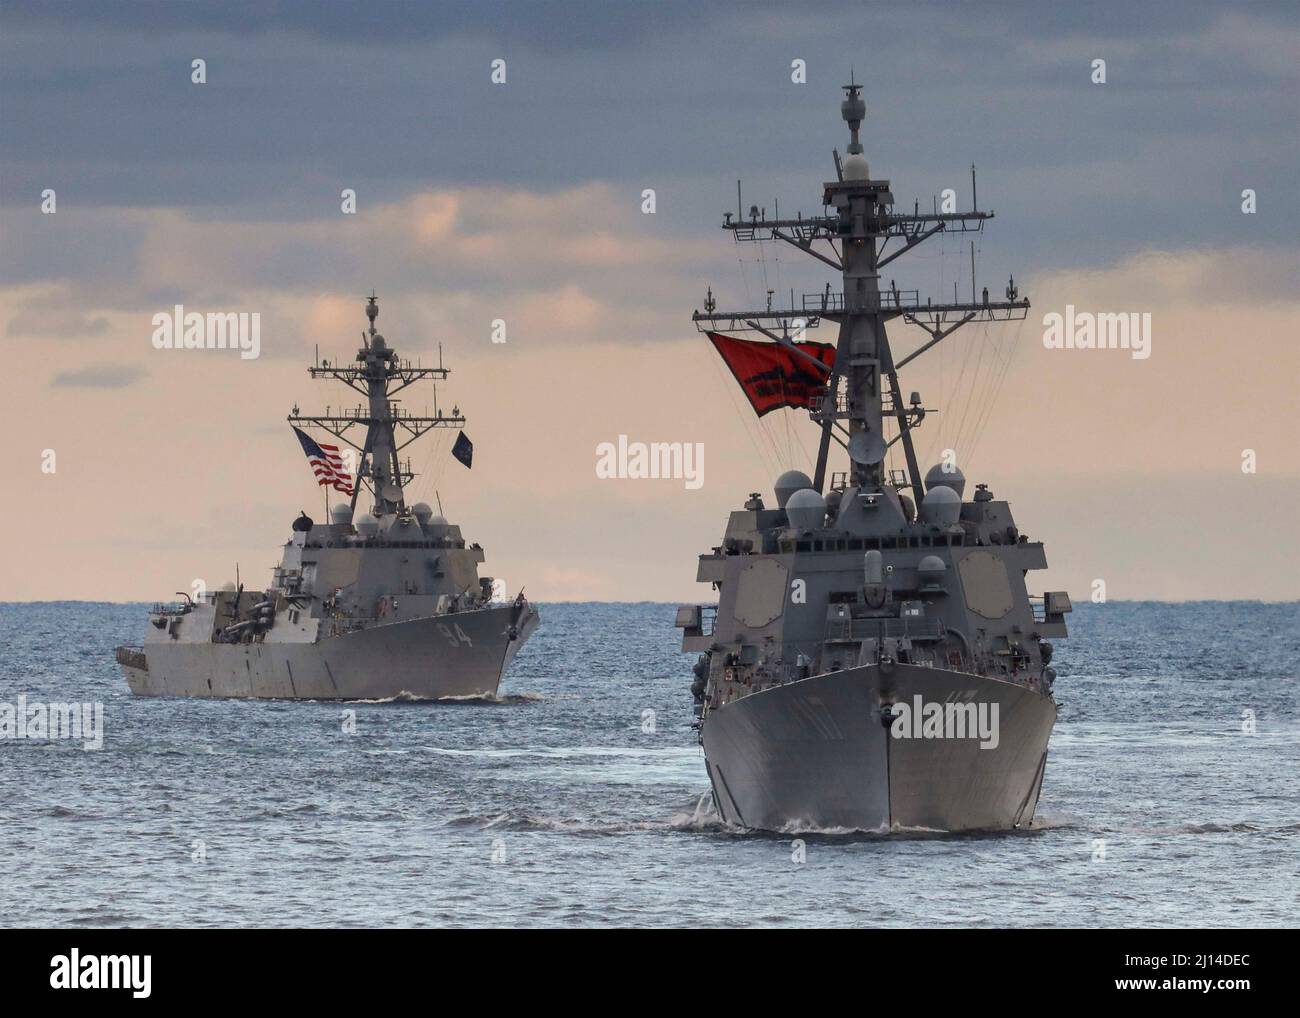 Atlantic Ocean, United States. 15 March, 2022. The U.S. Navy Arleigh-burke class guided-missile destroyers USS Paul Ignatius, right, and the USS Nitze sail in formation underway, March 15, 2022 in the Atlantic Ocean.  Credit: MC1 Eric Coffer/Planetpix/Alamy Live News Stock Photo